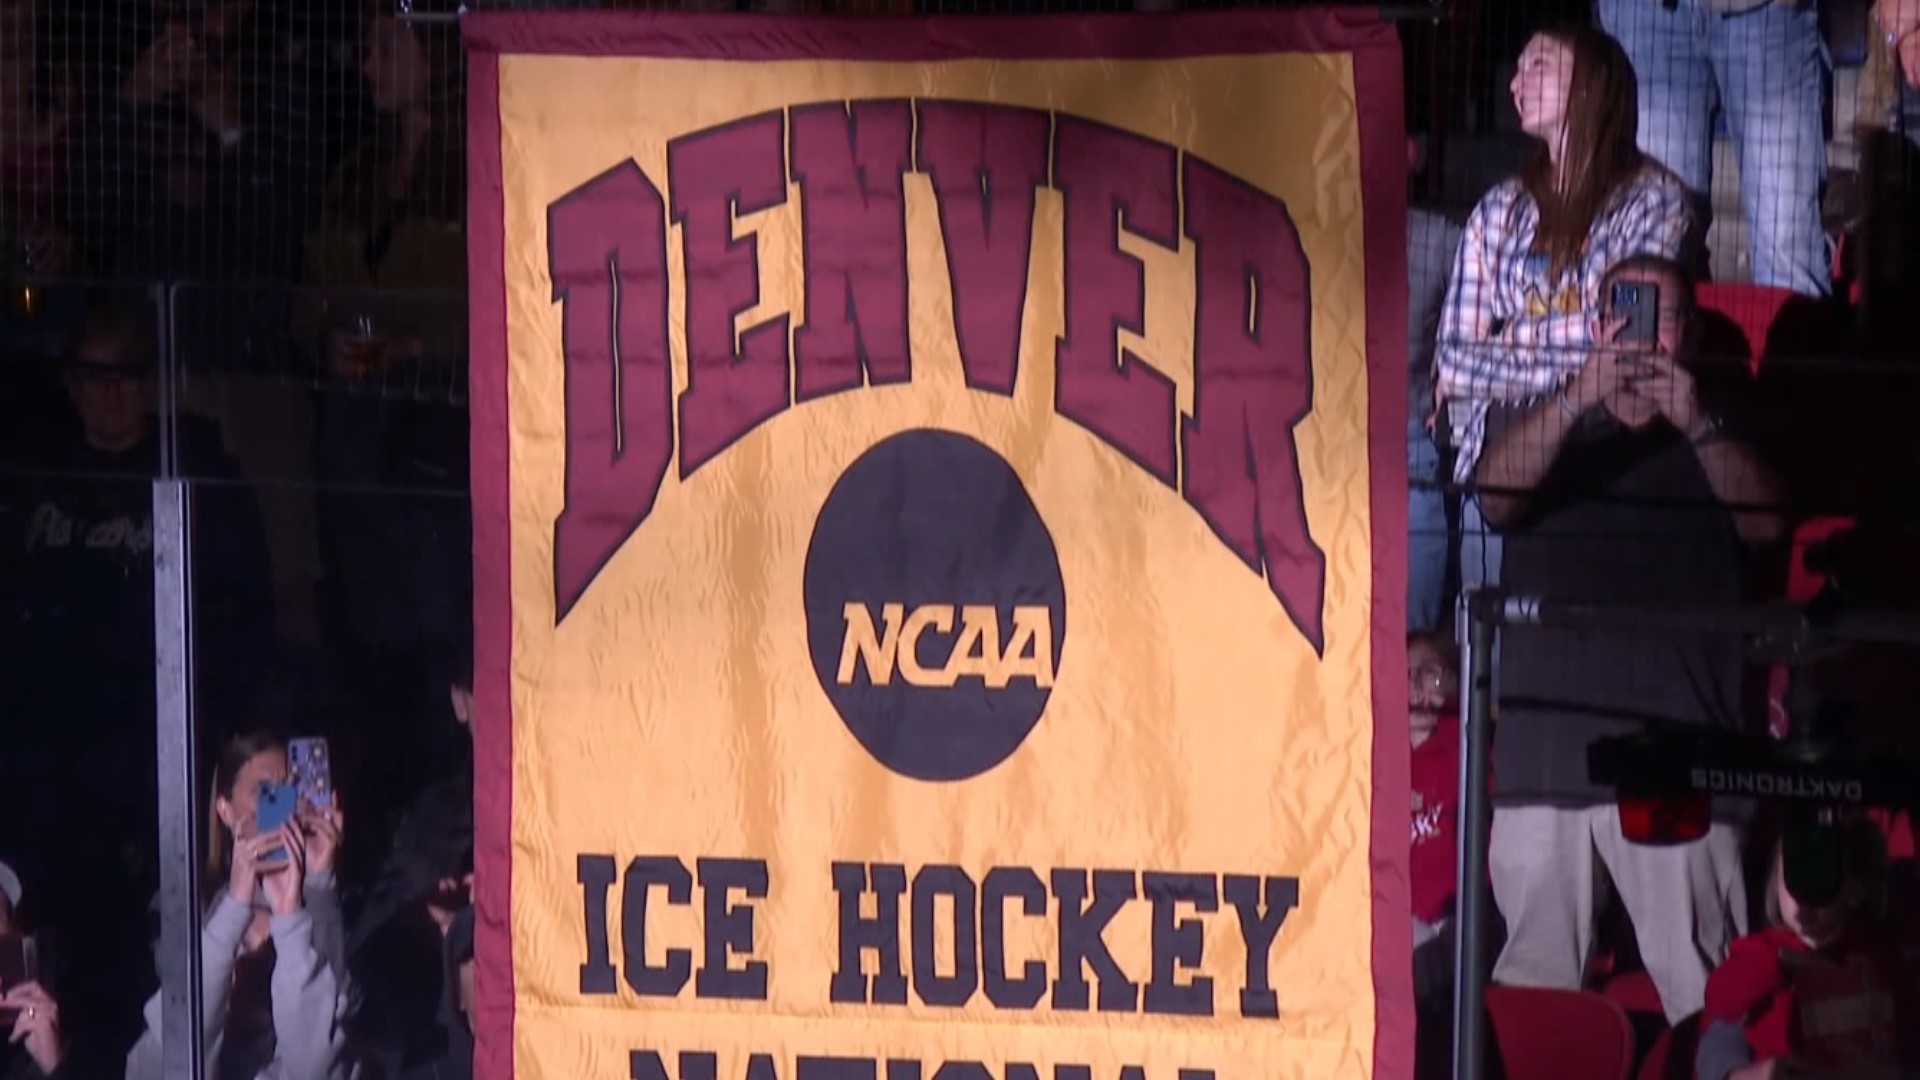 The Pioneers raised their ninth national championship banner in program history to the Magness Arena rafters Saturday night.